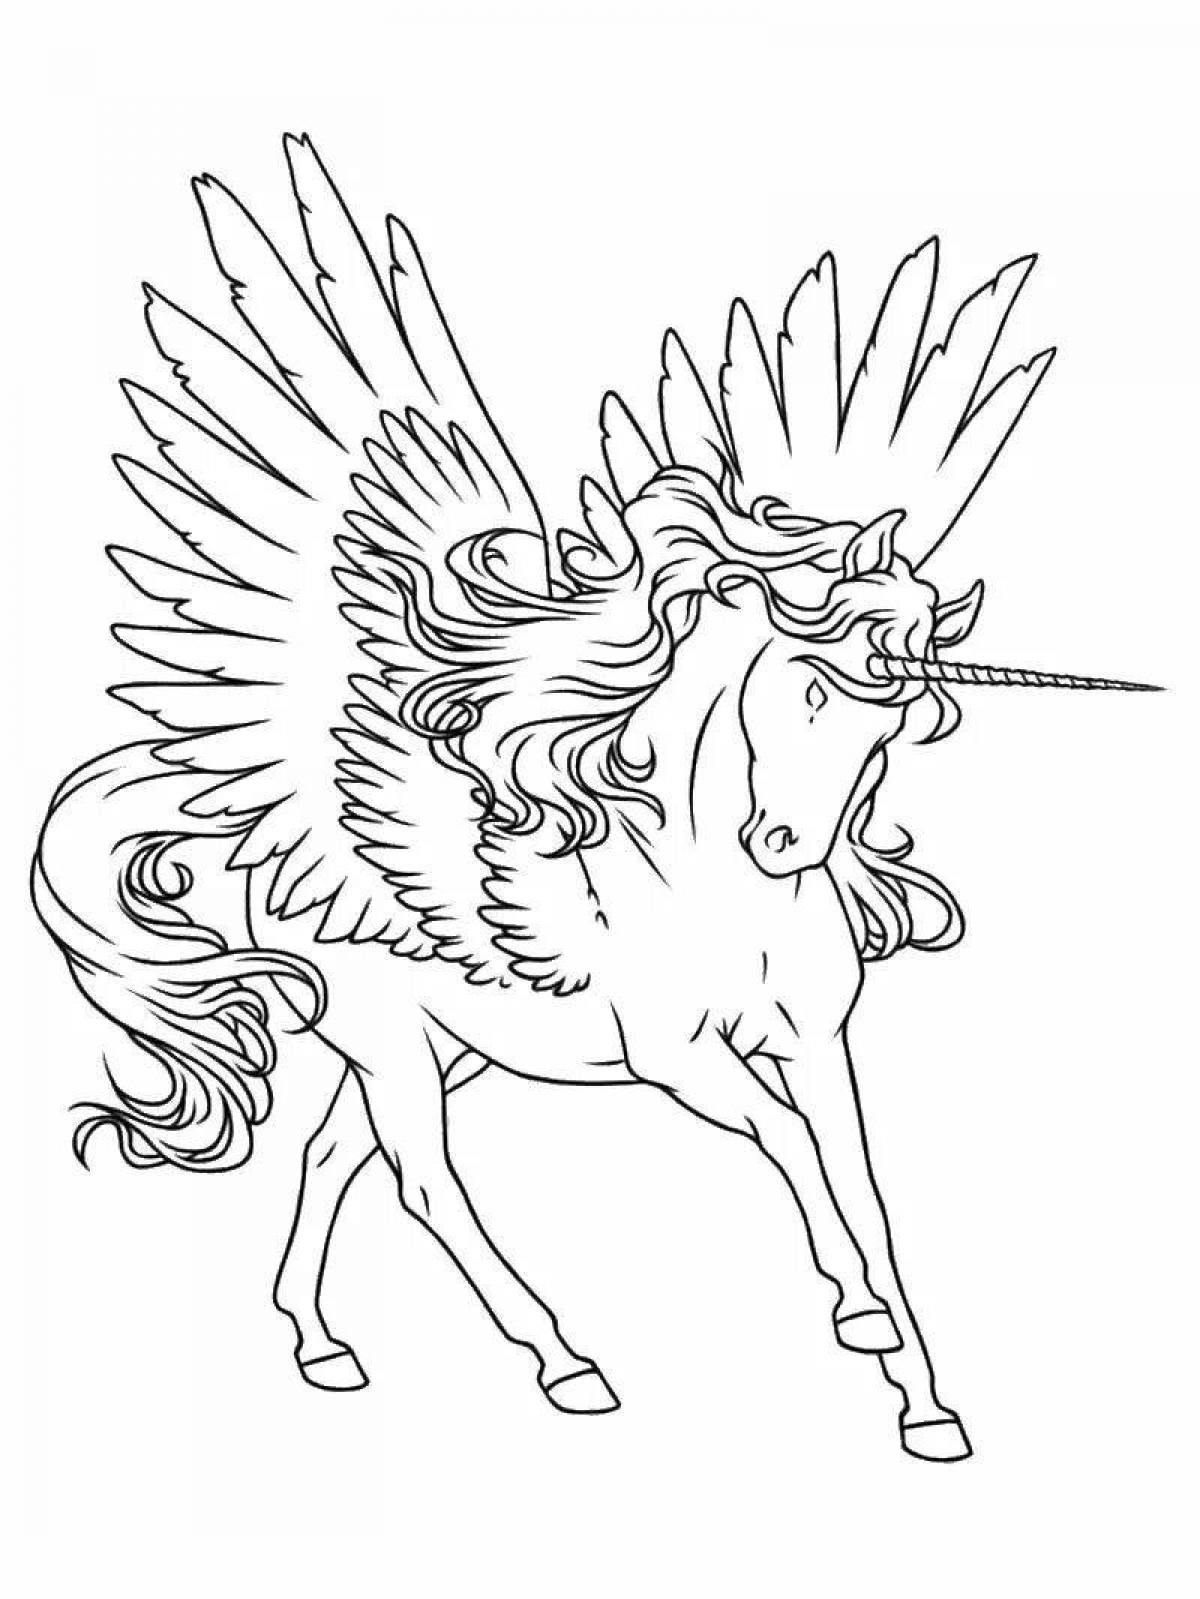 Dazzling coloring unicorn with wings for kids